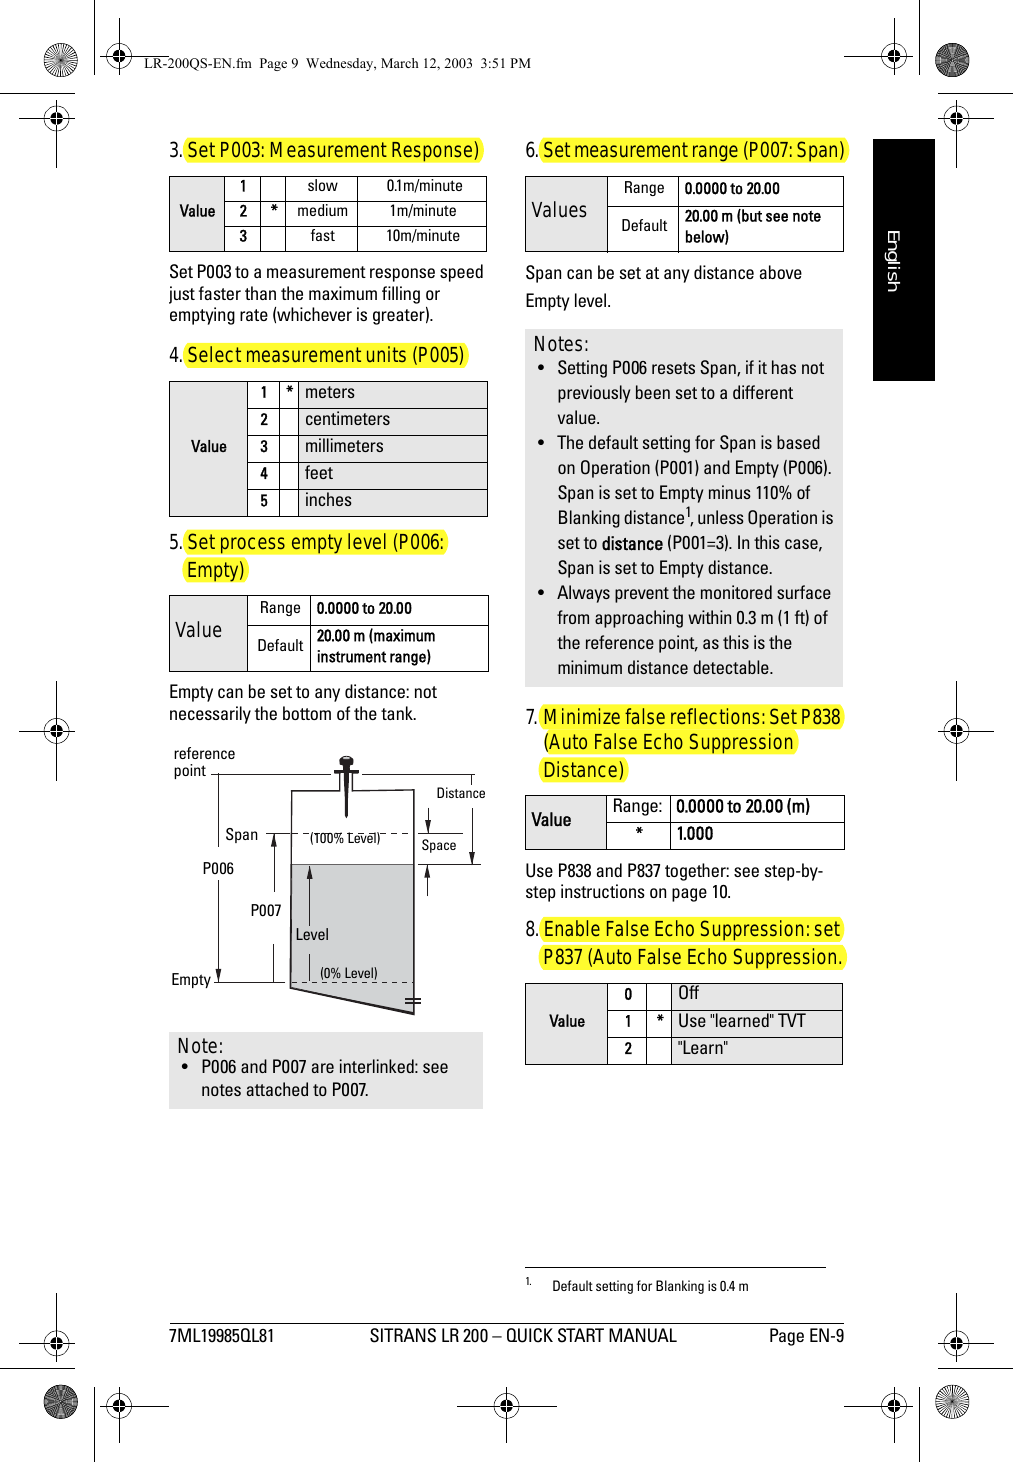 7ML19985QL81 SITRANS LR 200 – QUICK START MANUAL Page EN-9mmmmmEnglish3. Set P003: Measurement Response)Set P003 to a measurement response speed just faster than the maximum filling or emptying rate (whichever is greater).4. Select measurement units (P005) 5. Set process empty level (P006: Empty)Empty can be set to any distance: not necessarily the bottom of the tank.6. Set measurement range (P007: Span)Span can be set at any distance above Empty level.1.7. Minimize false reflections: Set P838 (Auto False Echo Suppression Distance)Use P838 and P837 together: see step-by-step instructions on page 10.8. Enable False Echo Suppression: set P837 (Auto False Echo Suppression.Value1slow  0.1m/minute2*medium 1m/minute3fast 10m/minuteValue1*meters2centimeters3millimeters4feet5inchesValue Range 0.0000 to 20.00 Default 20.00 m (maximum instrument range)Note: • P006 and P007 are interlinked: see notes attached to P007. P007 P006 (100% Level) (0% Level)LevelEmptySpanreference pointSpaceDistanceValues Range 0.0000 to 20.00 Default 20.00 m (but see note below)1. Default setting for Blanking is 0.4 mNotes: • Setting P006 resets Span, if it has not previously been set to a different value.• The default setting for Span is based on Operation (P001) and Empty (P006). Span is set to Empty minus 110% of Blanking distance1, unless Operation is set to distance (P001=3). In this case, Span is set to Empty distance.• Always prevent the monitored surface from approaching within 0.3 m (1 ft) of the reference point, as this is the minimum distance detectable.Value Range:  0.0000 to 20.00 (m)*1.000Value0Off1*Use &quot;learned&quot; TVT2&quot;Learn&quot;LR-200QS-EN.fm  Page 9  Wednesday, March 12, 2003  3:51 PM